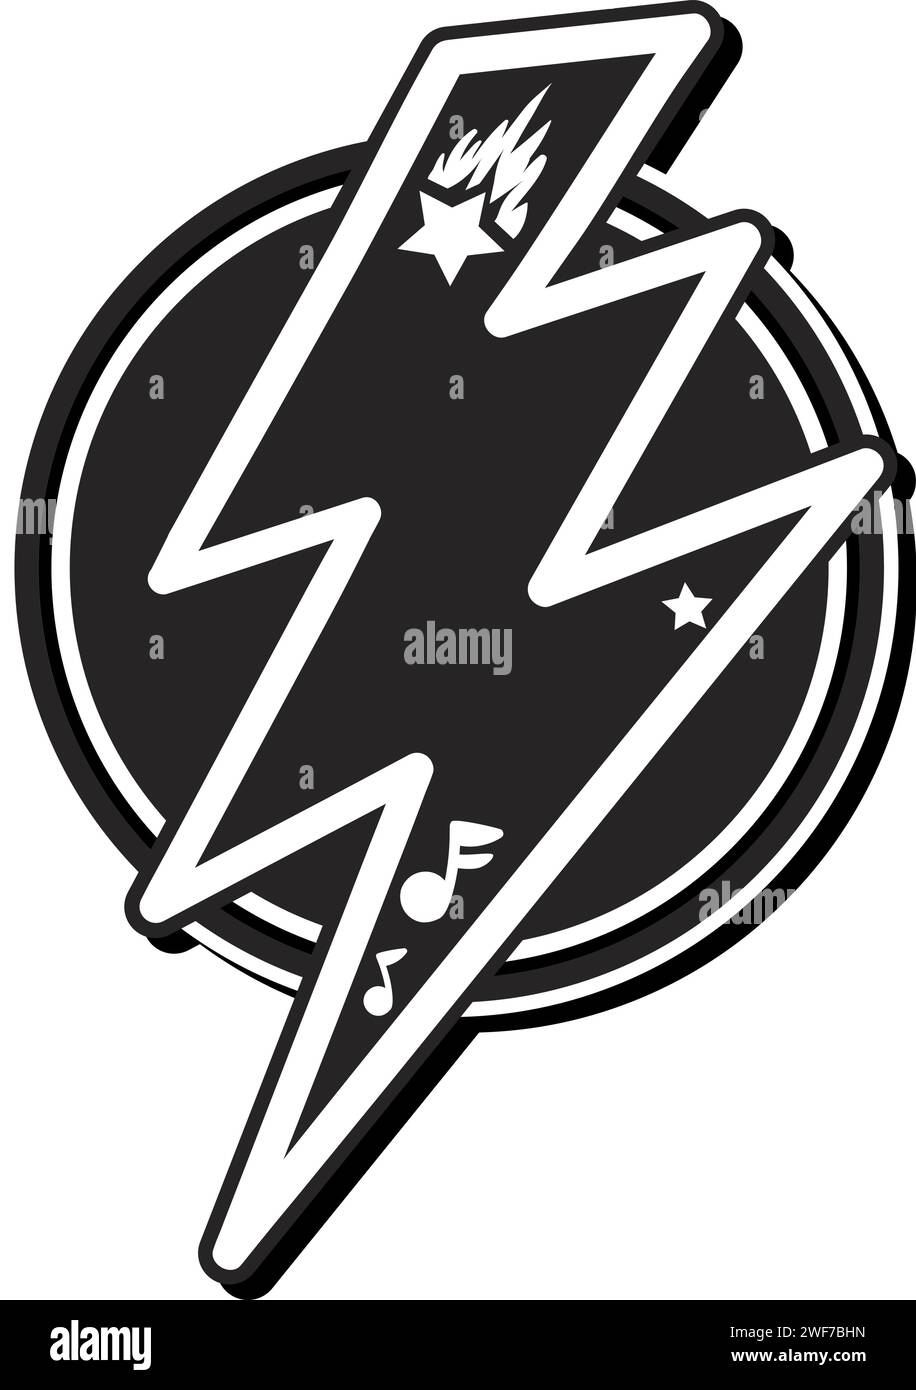 Minimalistic logo emblem of Electric Lightning Discharge. Badge template for slogan and name brand against round backdrop. Simple black and white vect Stock Vector